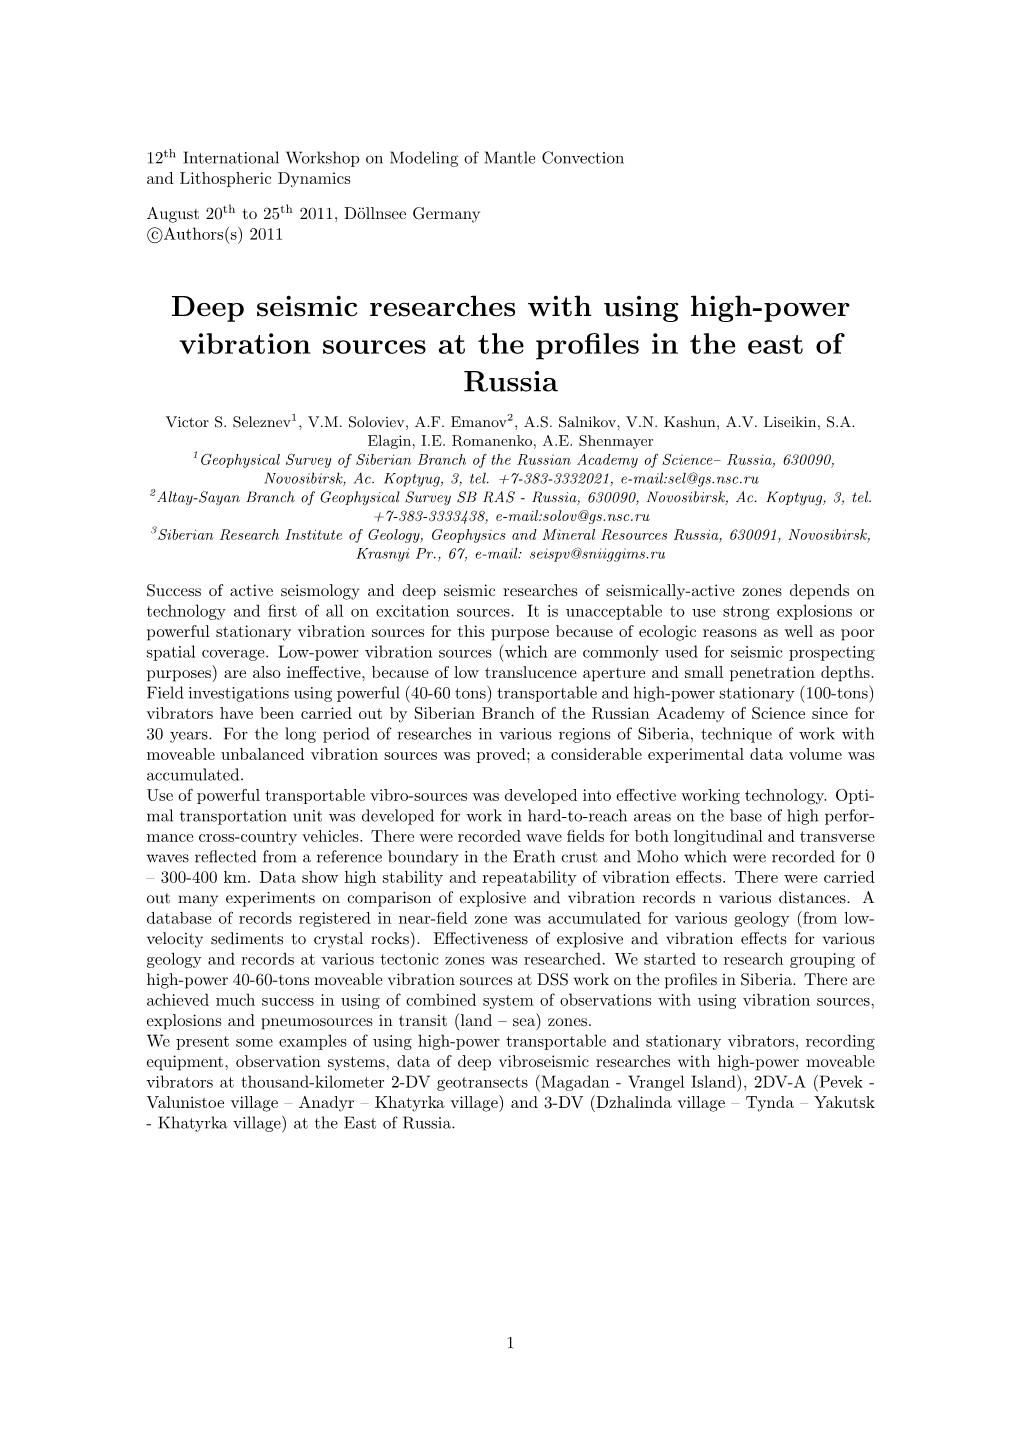 Deep Seismic Researches with Using High-Power Vibration Sources at the Proﬁles in the East of Russia